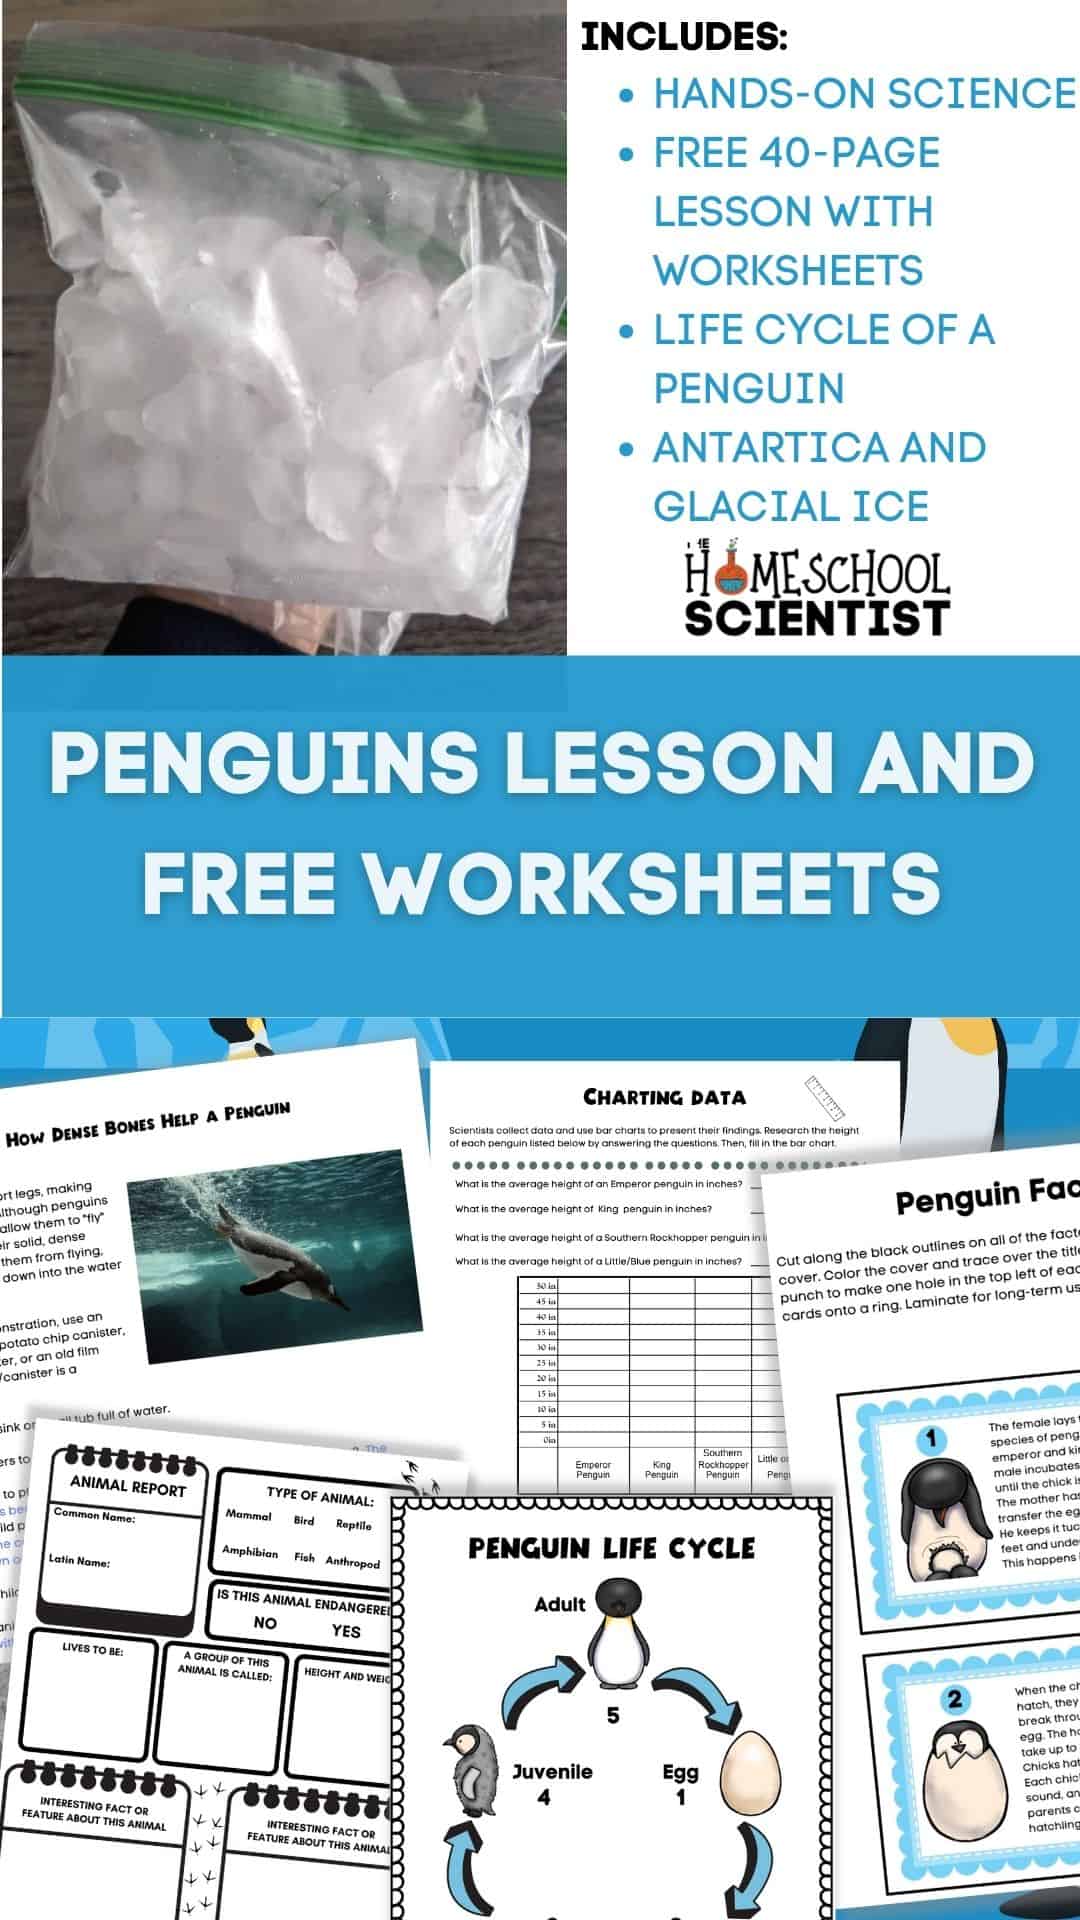 Penguins lesson and science activities. Free 40-page e-book with worksheets, hands-on science, life cycle info and MUCH more. Grade 2-6.